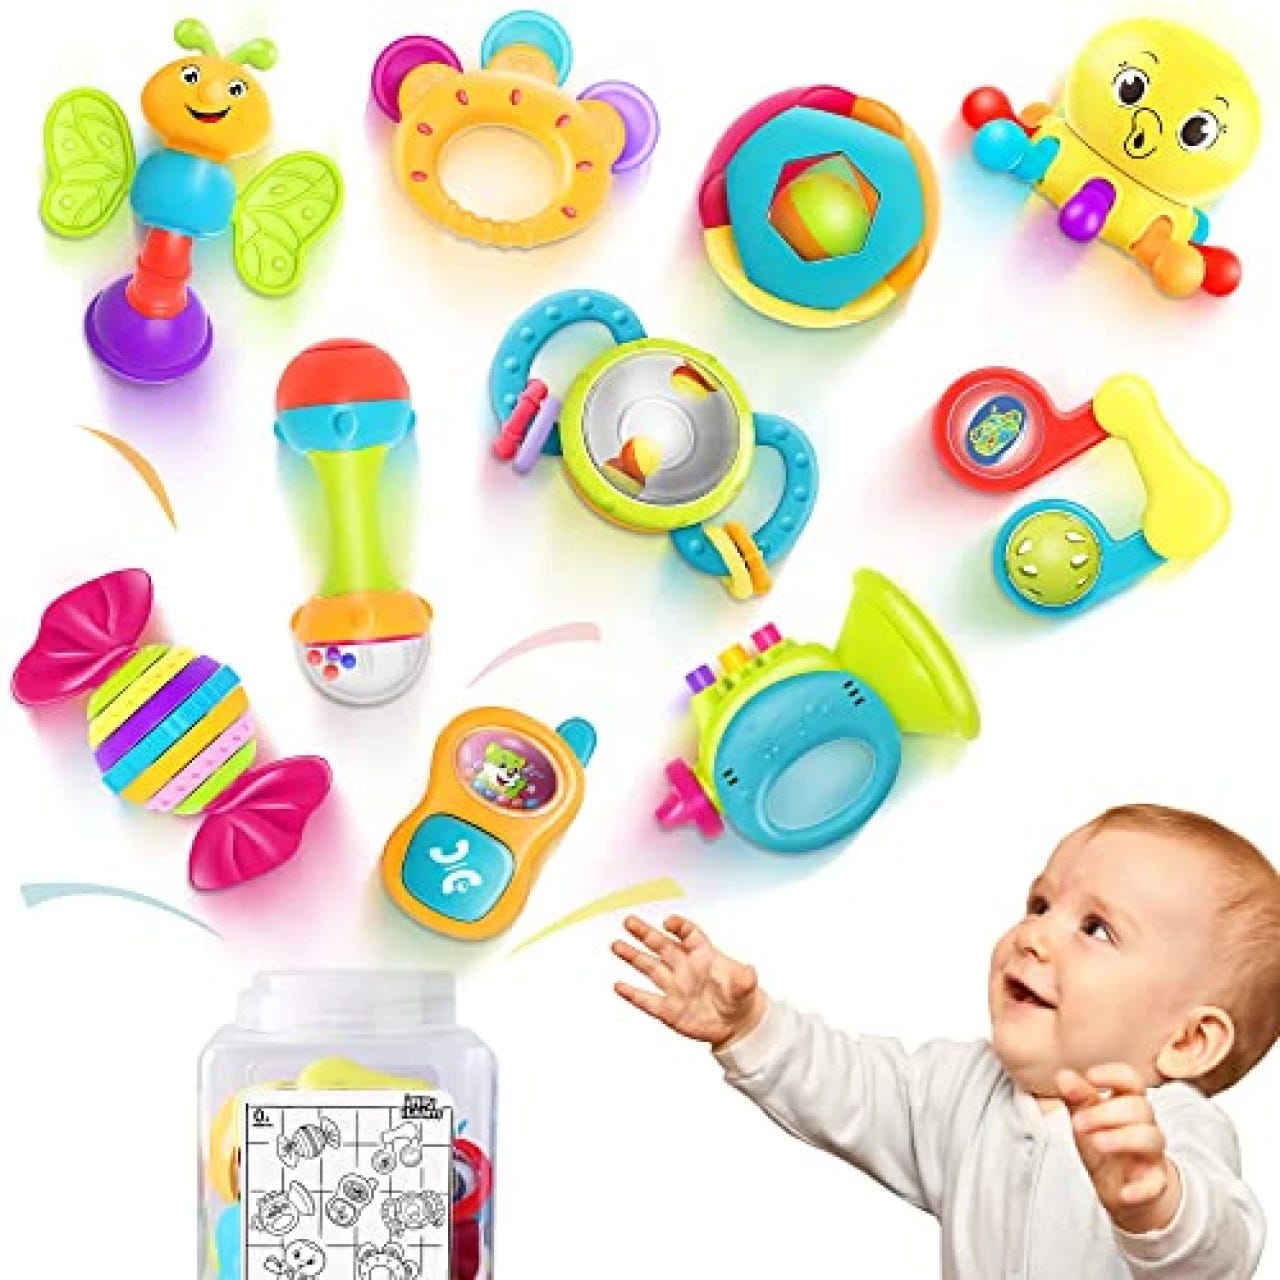 MOONTOY 12pcs Baby Rattle Teething Toys, Infant Teether Shaker Grab and  Spin Rattles Toy, Musical Toy Set, Early Educational Newborn Chew Toys  Gifts for 0, 3, 6, 9, 12 Months Infant Baby Boys Girls 12 pieces